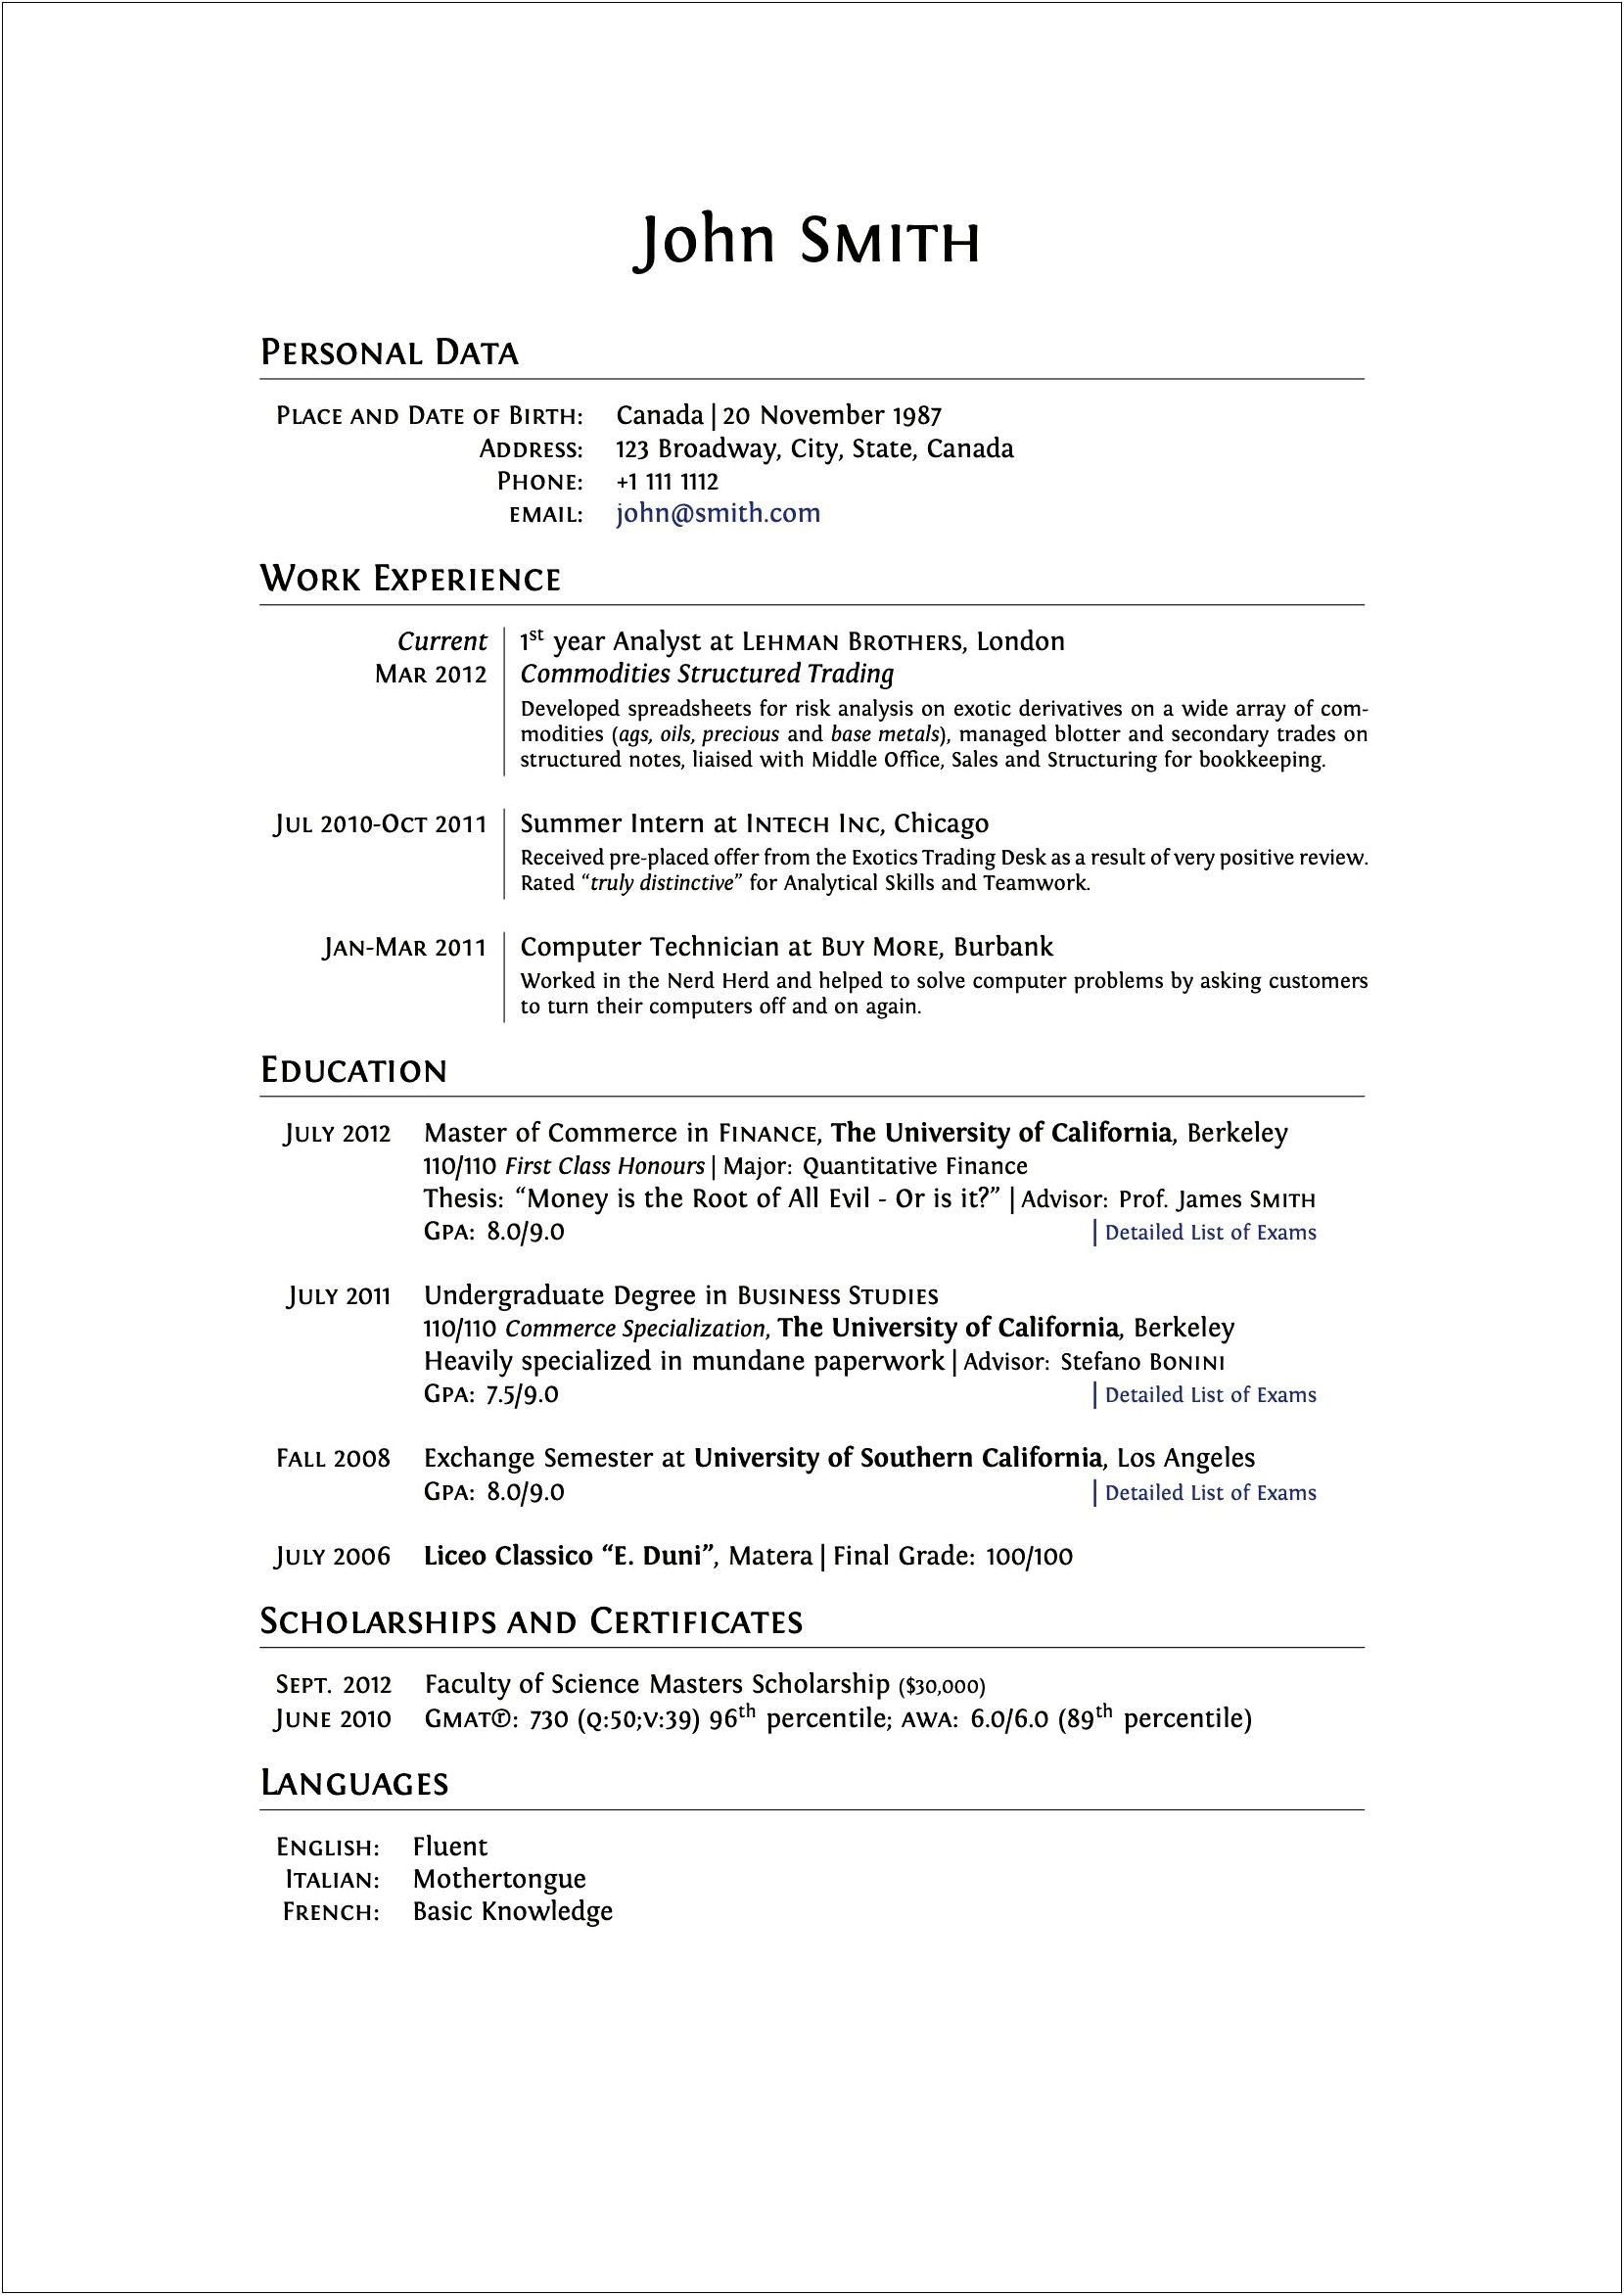 Sample Resume For Lecturer In Computer Science